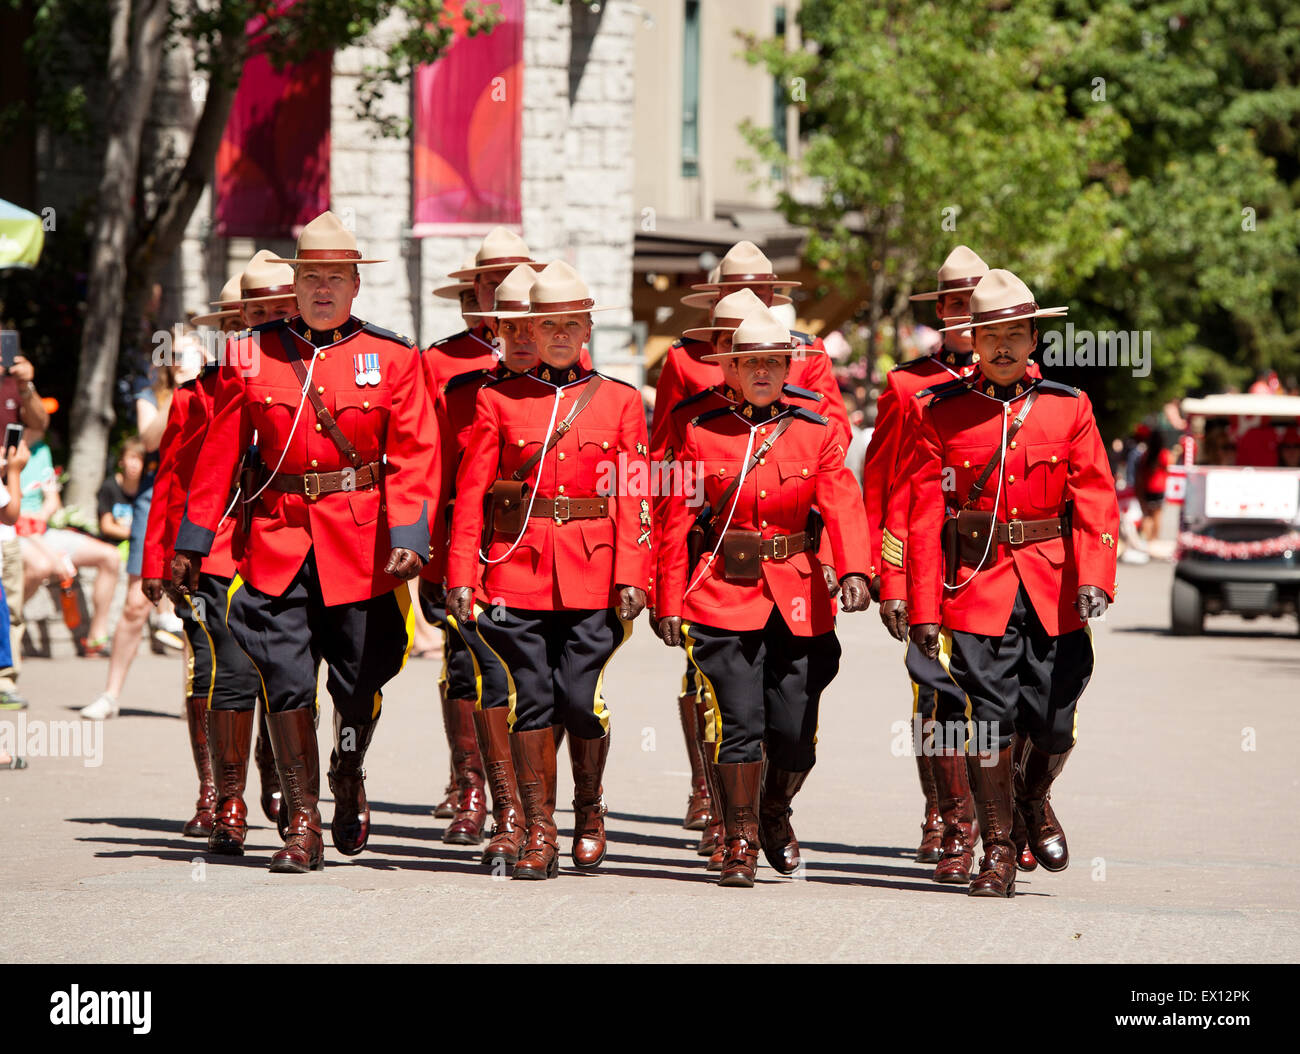 Royal Canadian Mounted Police officers parade in ceremonial red serge uniforms for Canada Day.  Canadian Police, or RCMP Stock Photo